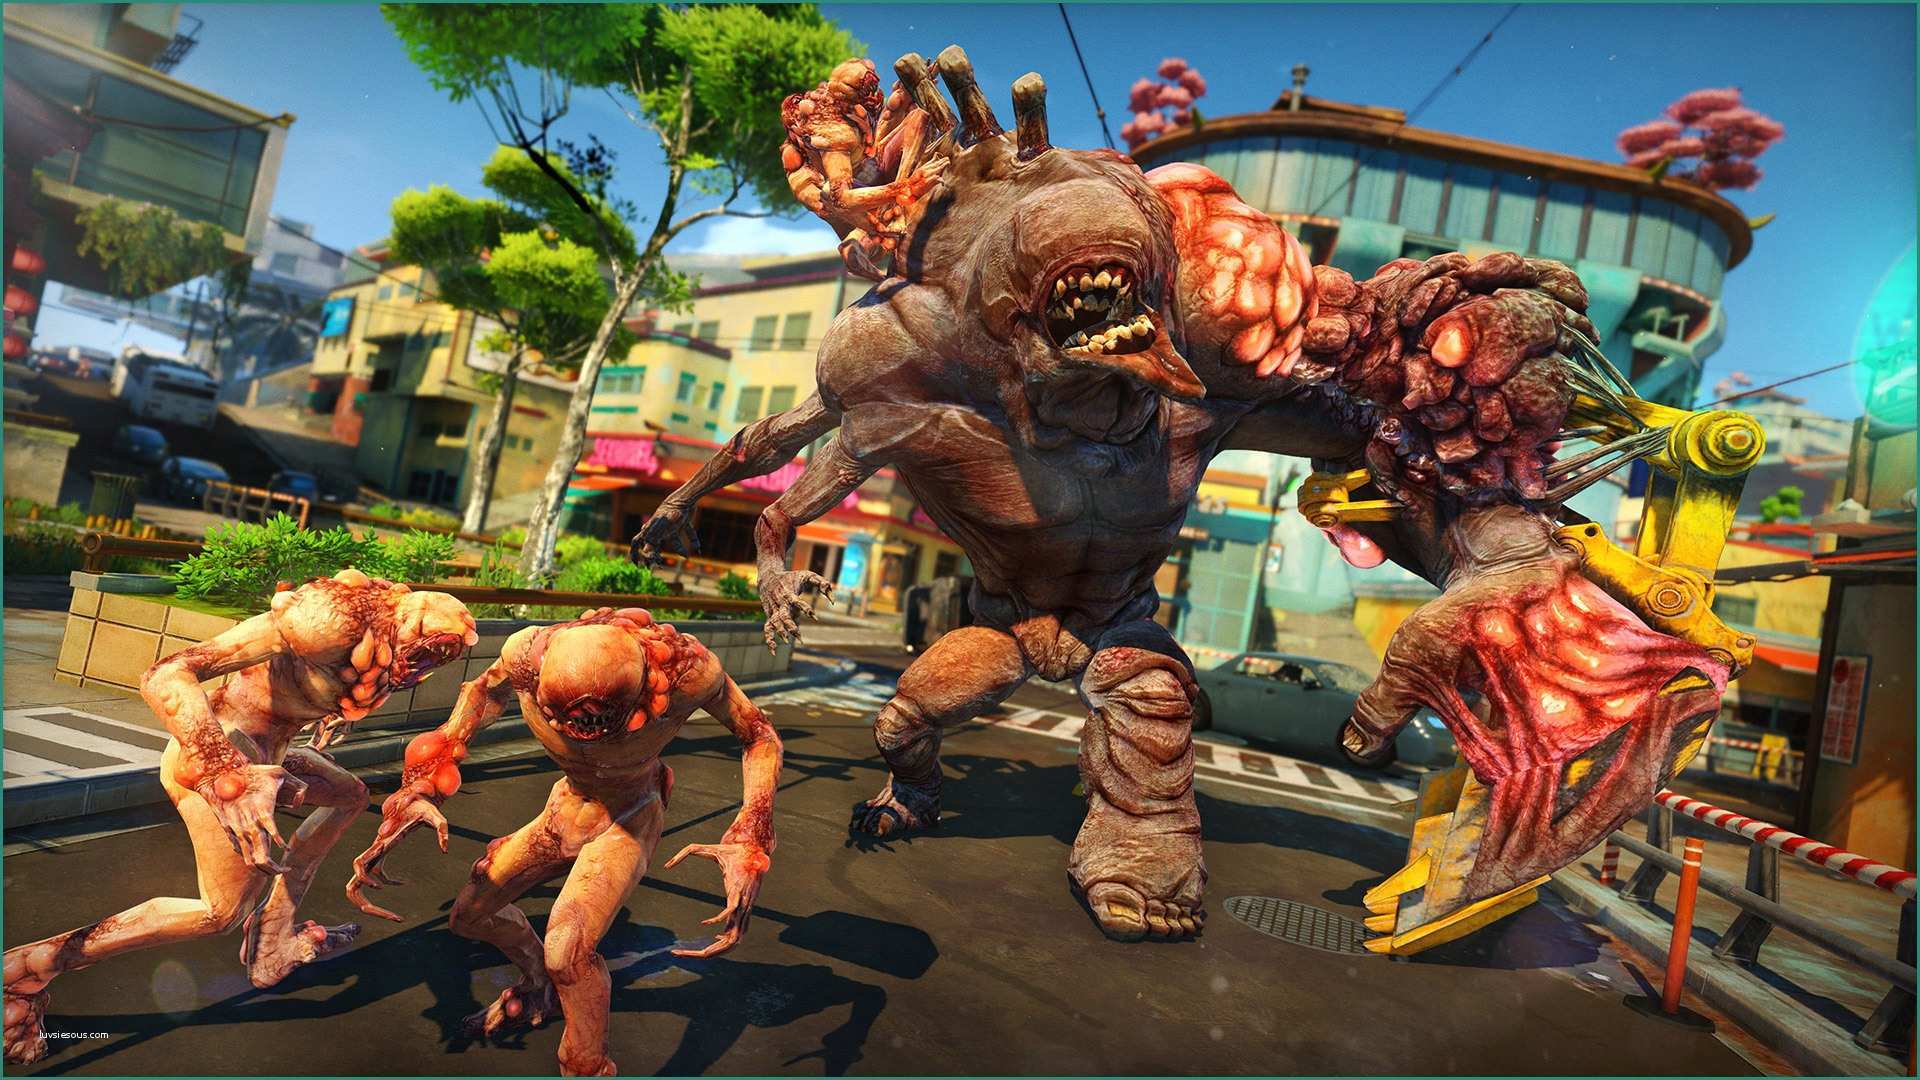 Sfondi Pc Gaming E Sunset Overdrive is Ing to Pc According to the Korean Rating